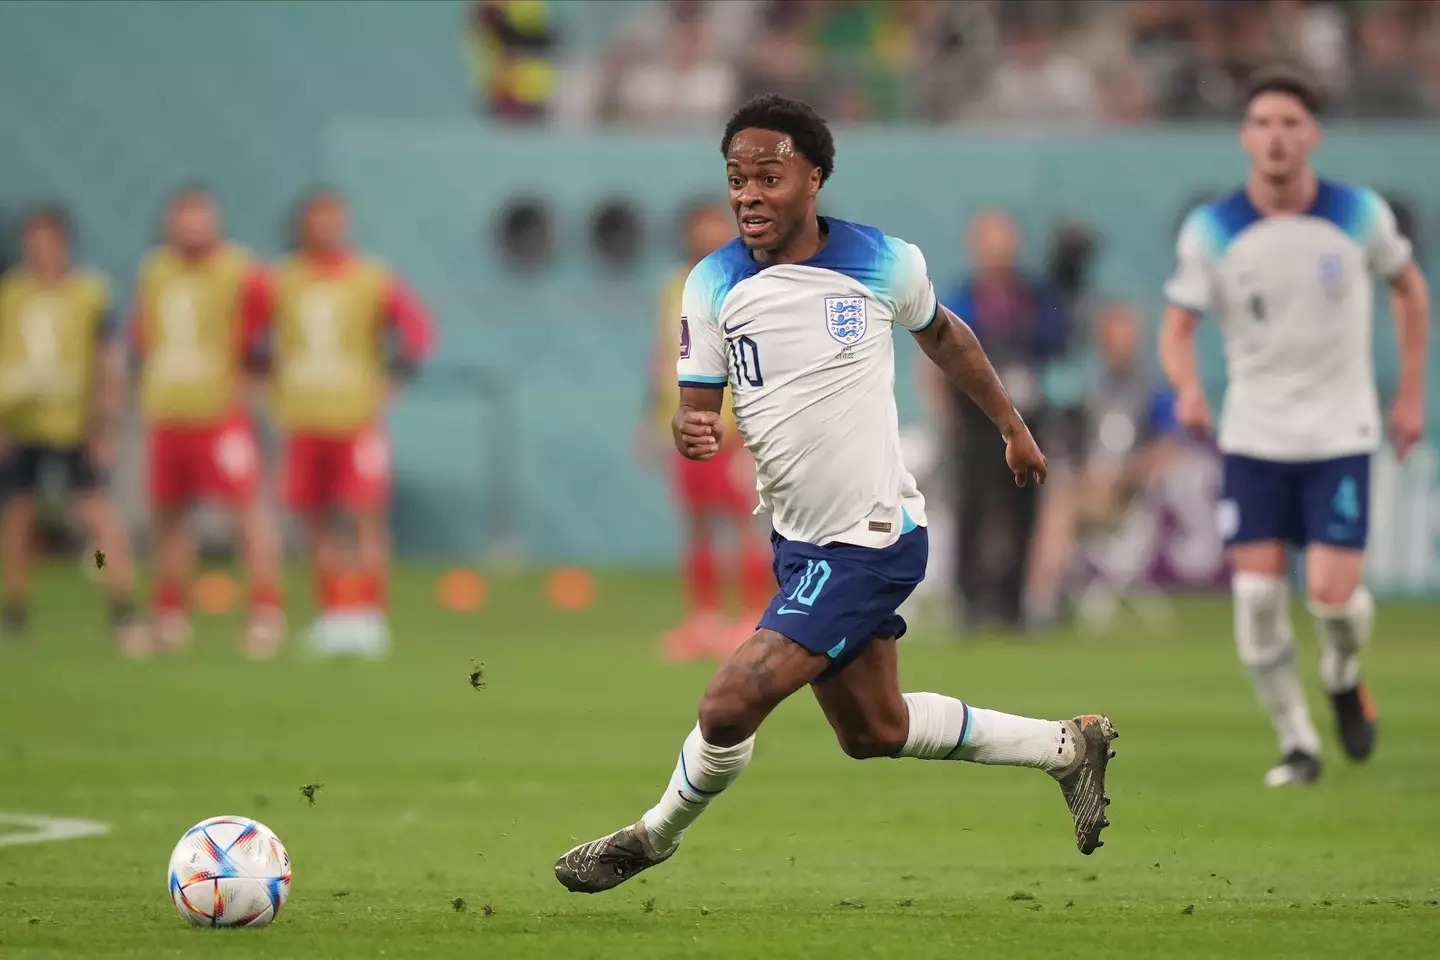 Sterling has scored one goal at this year's World Cup. (Image